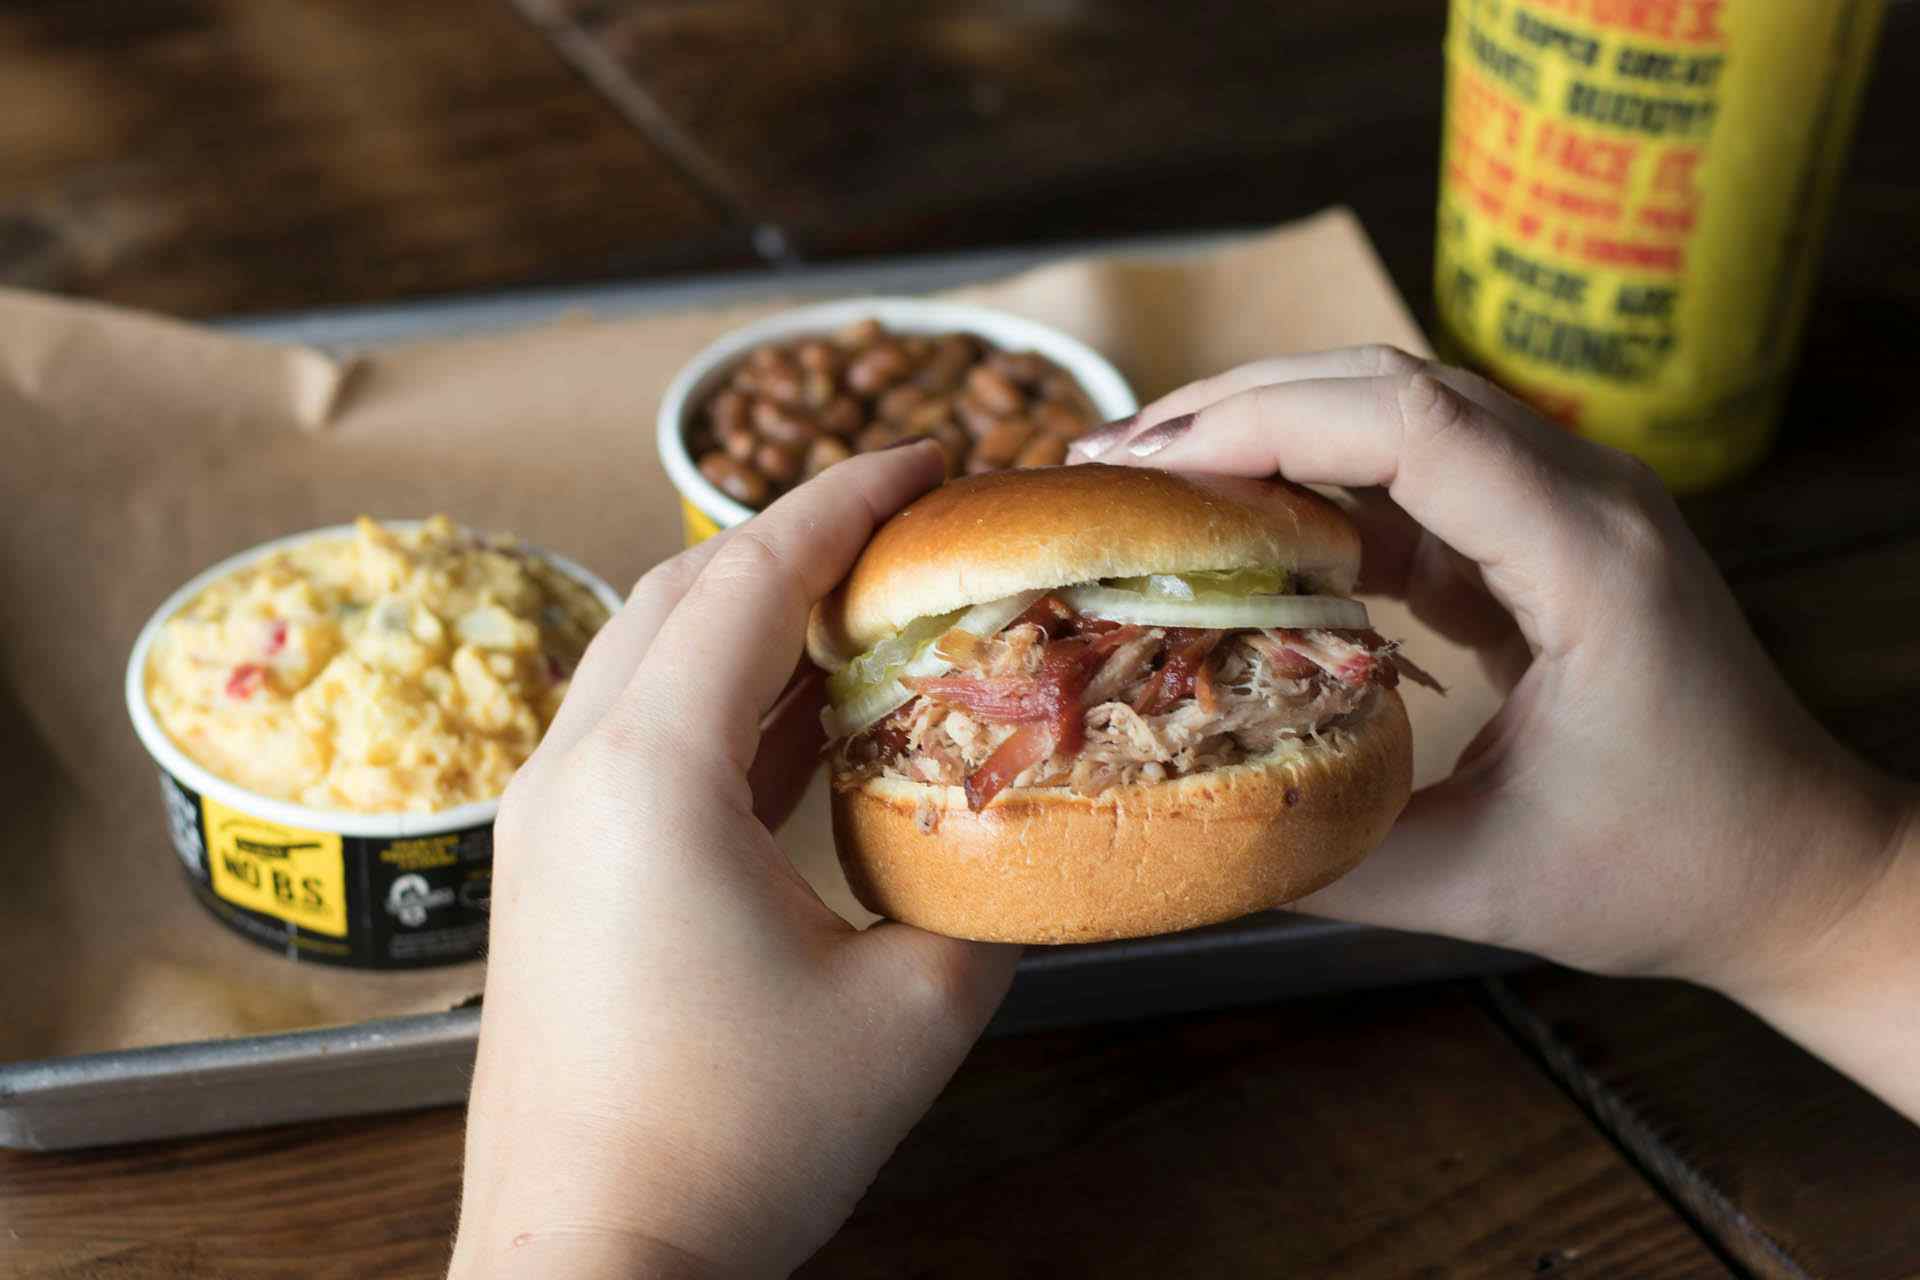 Emory Gets Ready for Lake Season with New Dickey’s Barbecue Pit